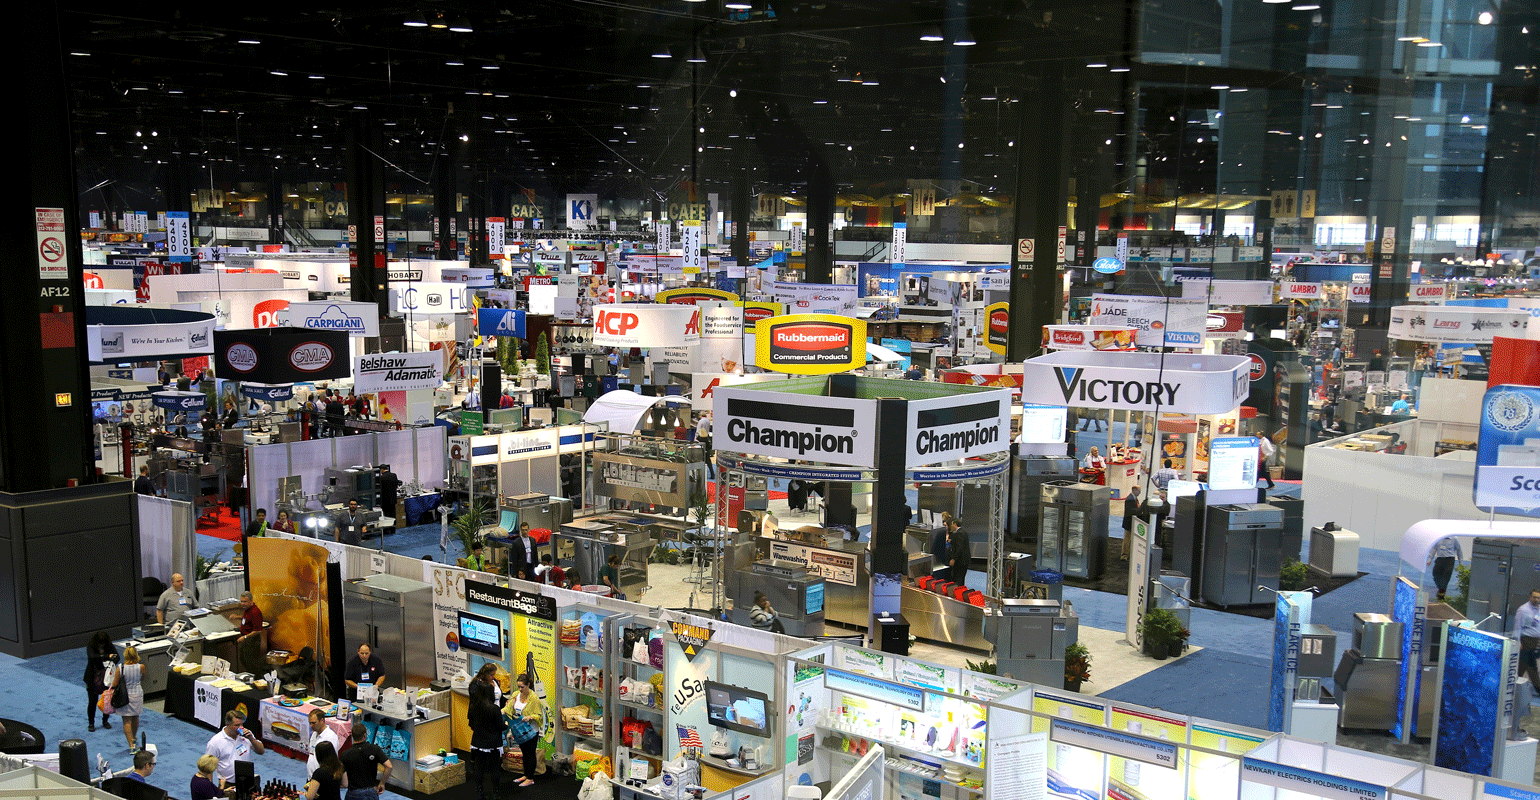 Will we find clarity at the National Restaurant Association Show